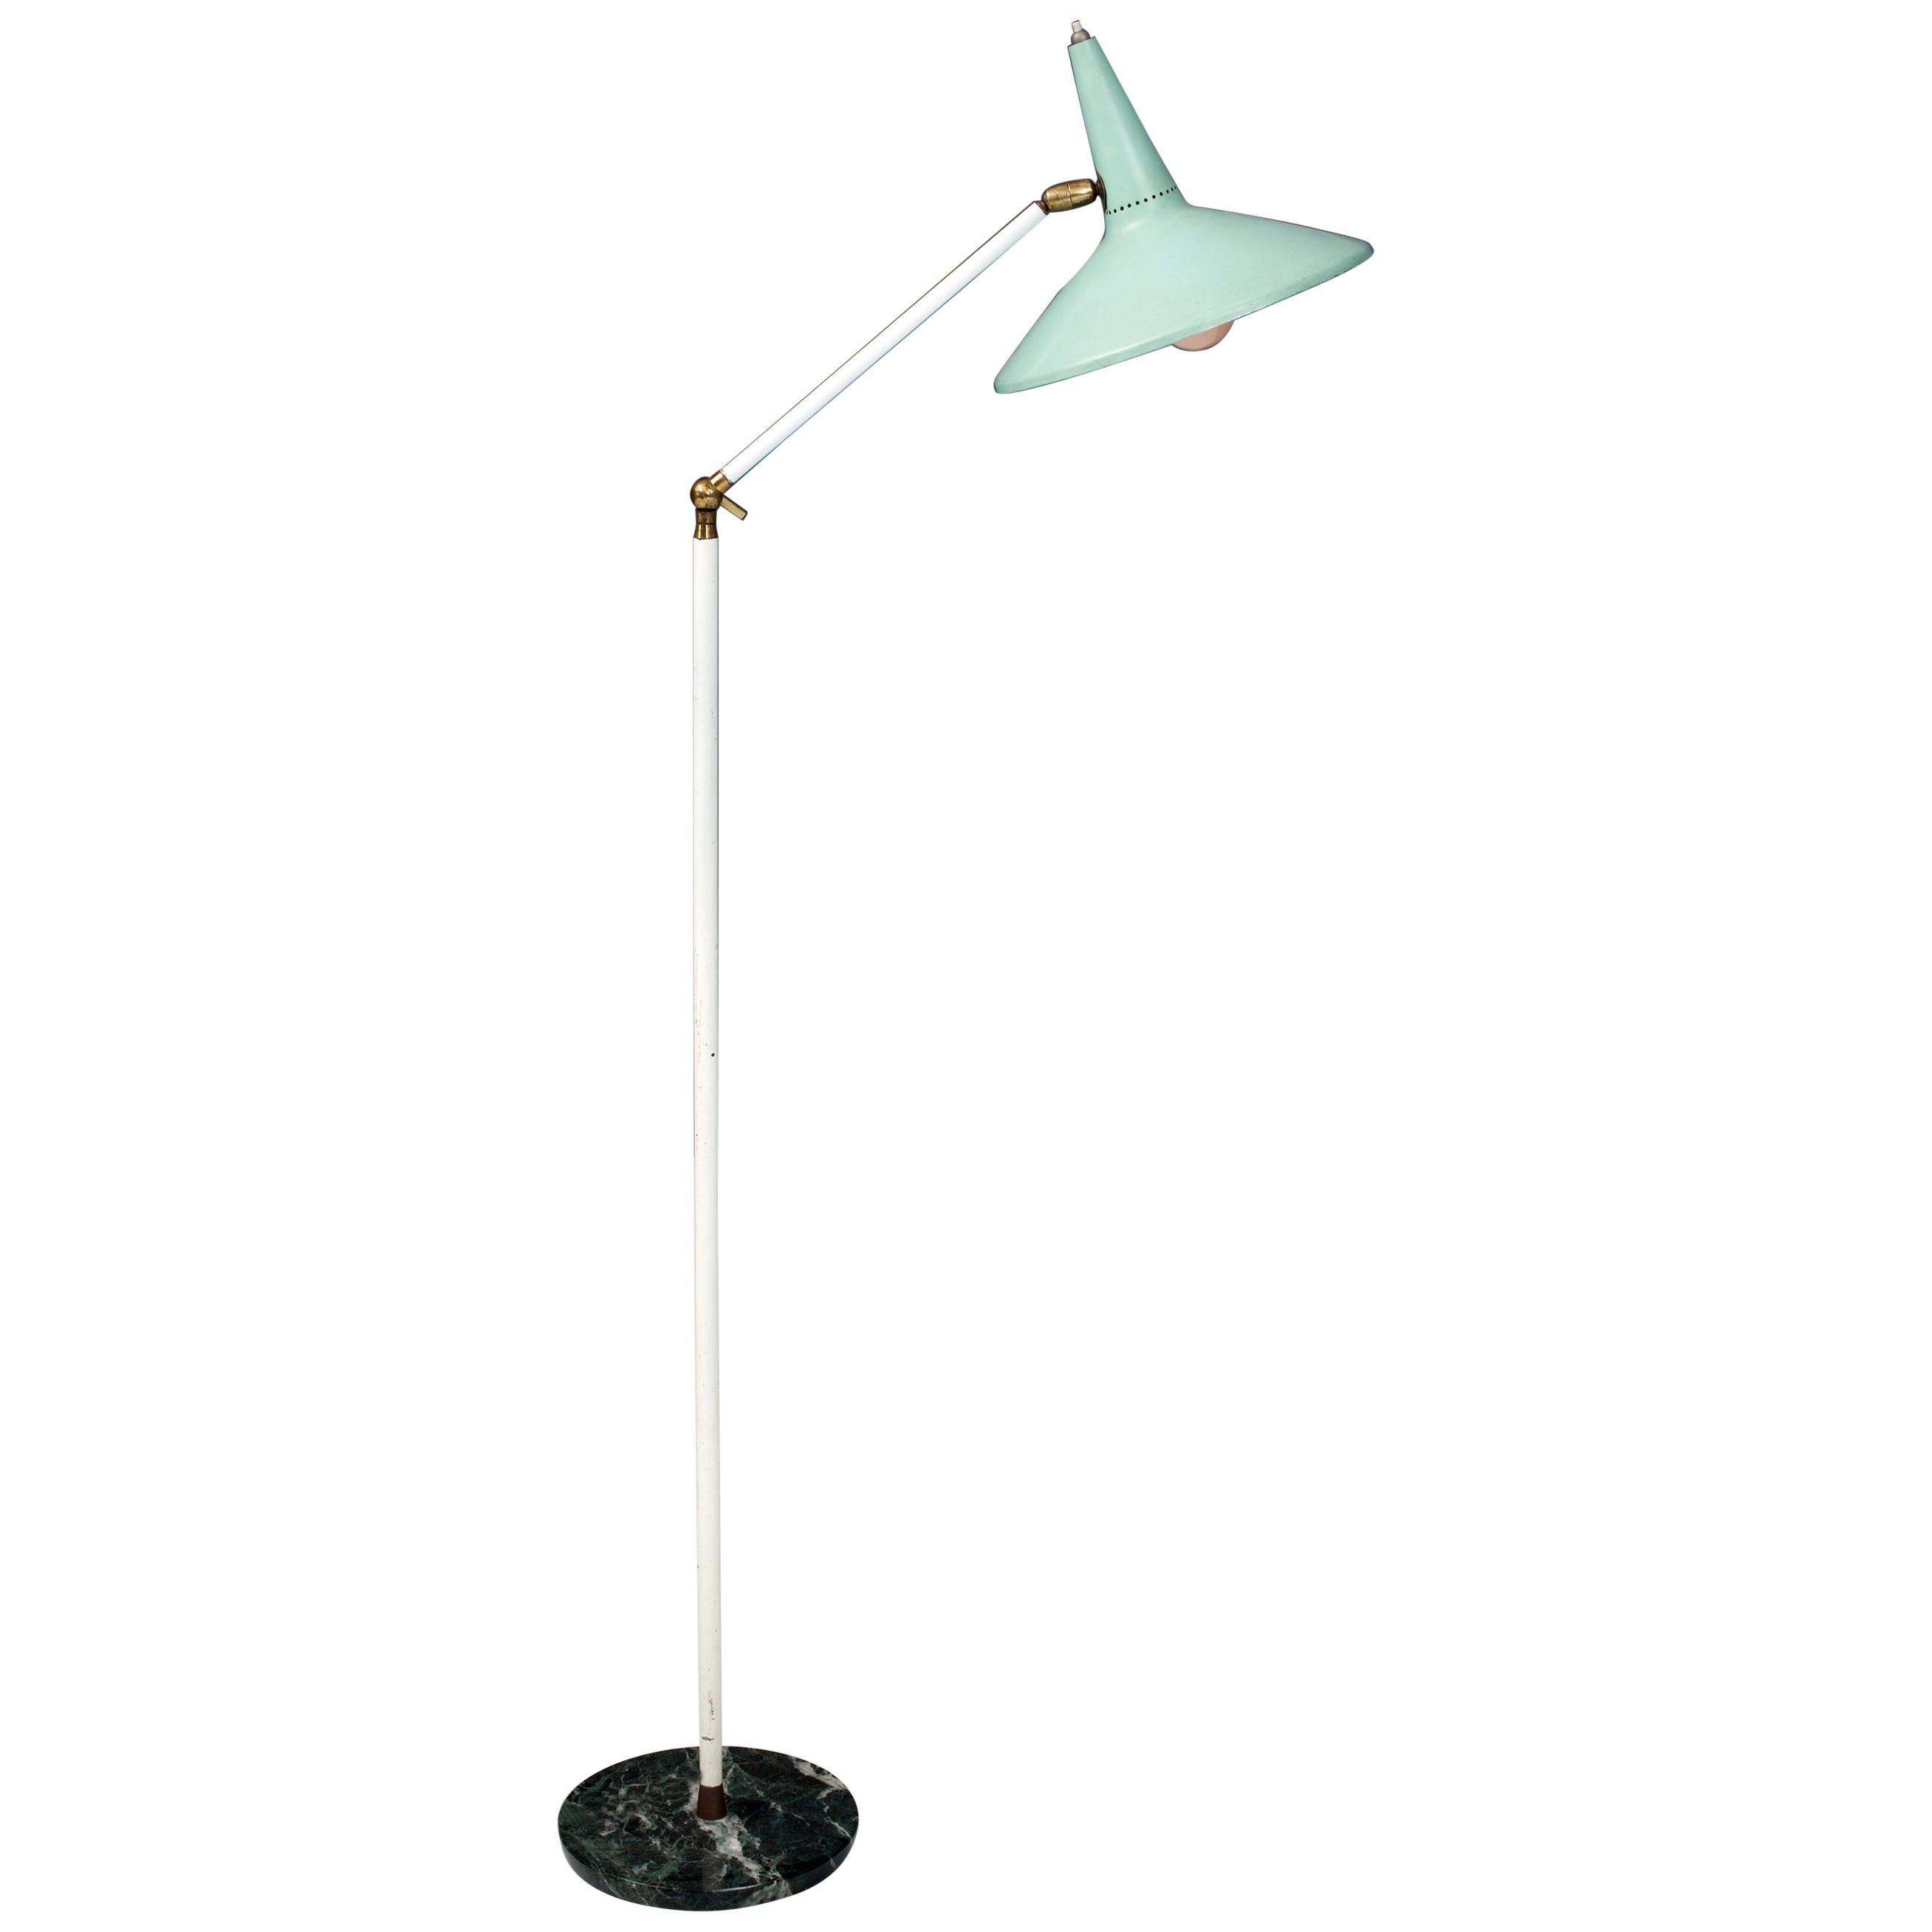 Stilux Milano Floor Lamp in Turquoise Metal, Brass and Marble, Italy, 1960s